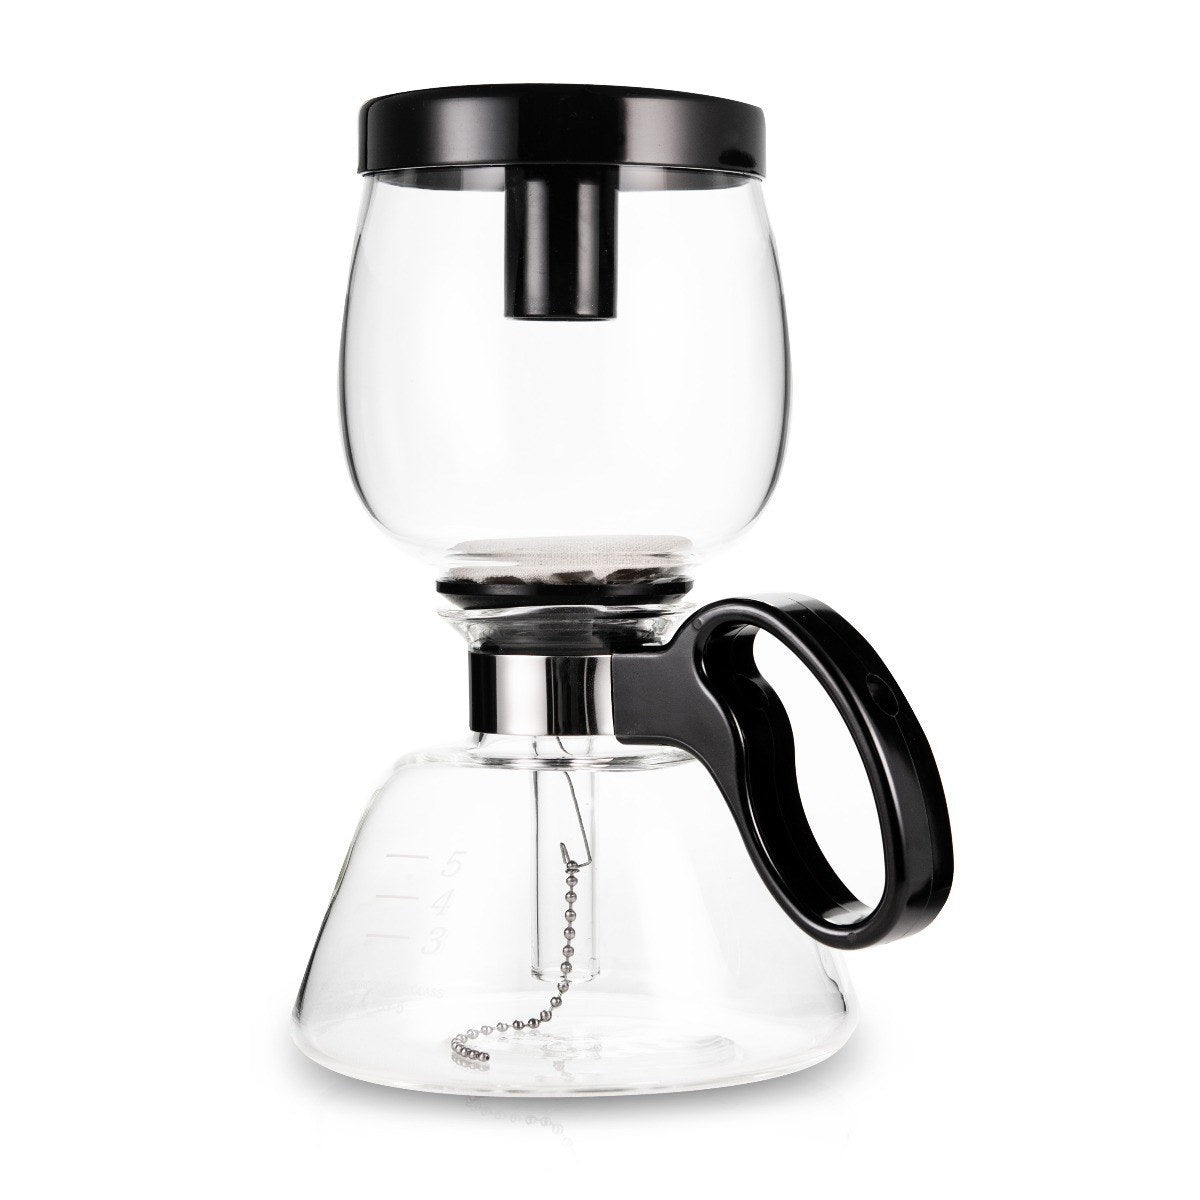 Best-selling stovetop espresso maker on  hailed as 'must